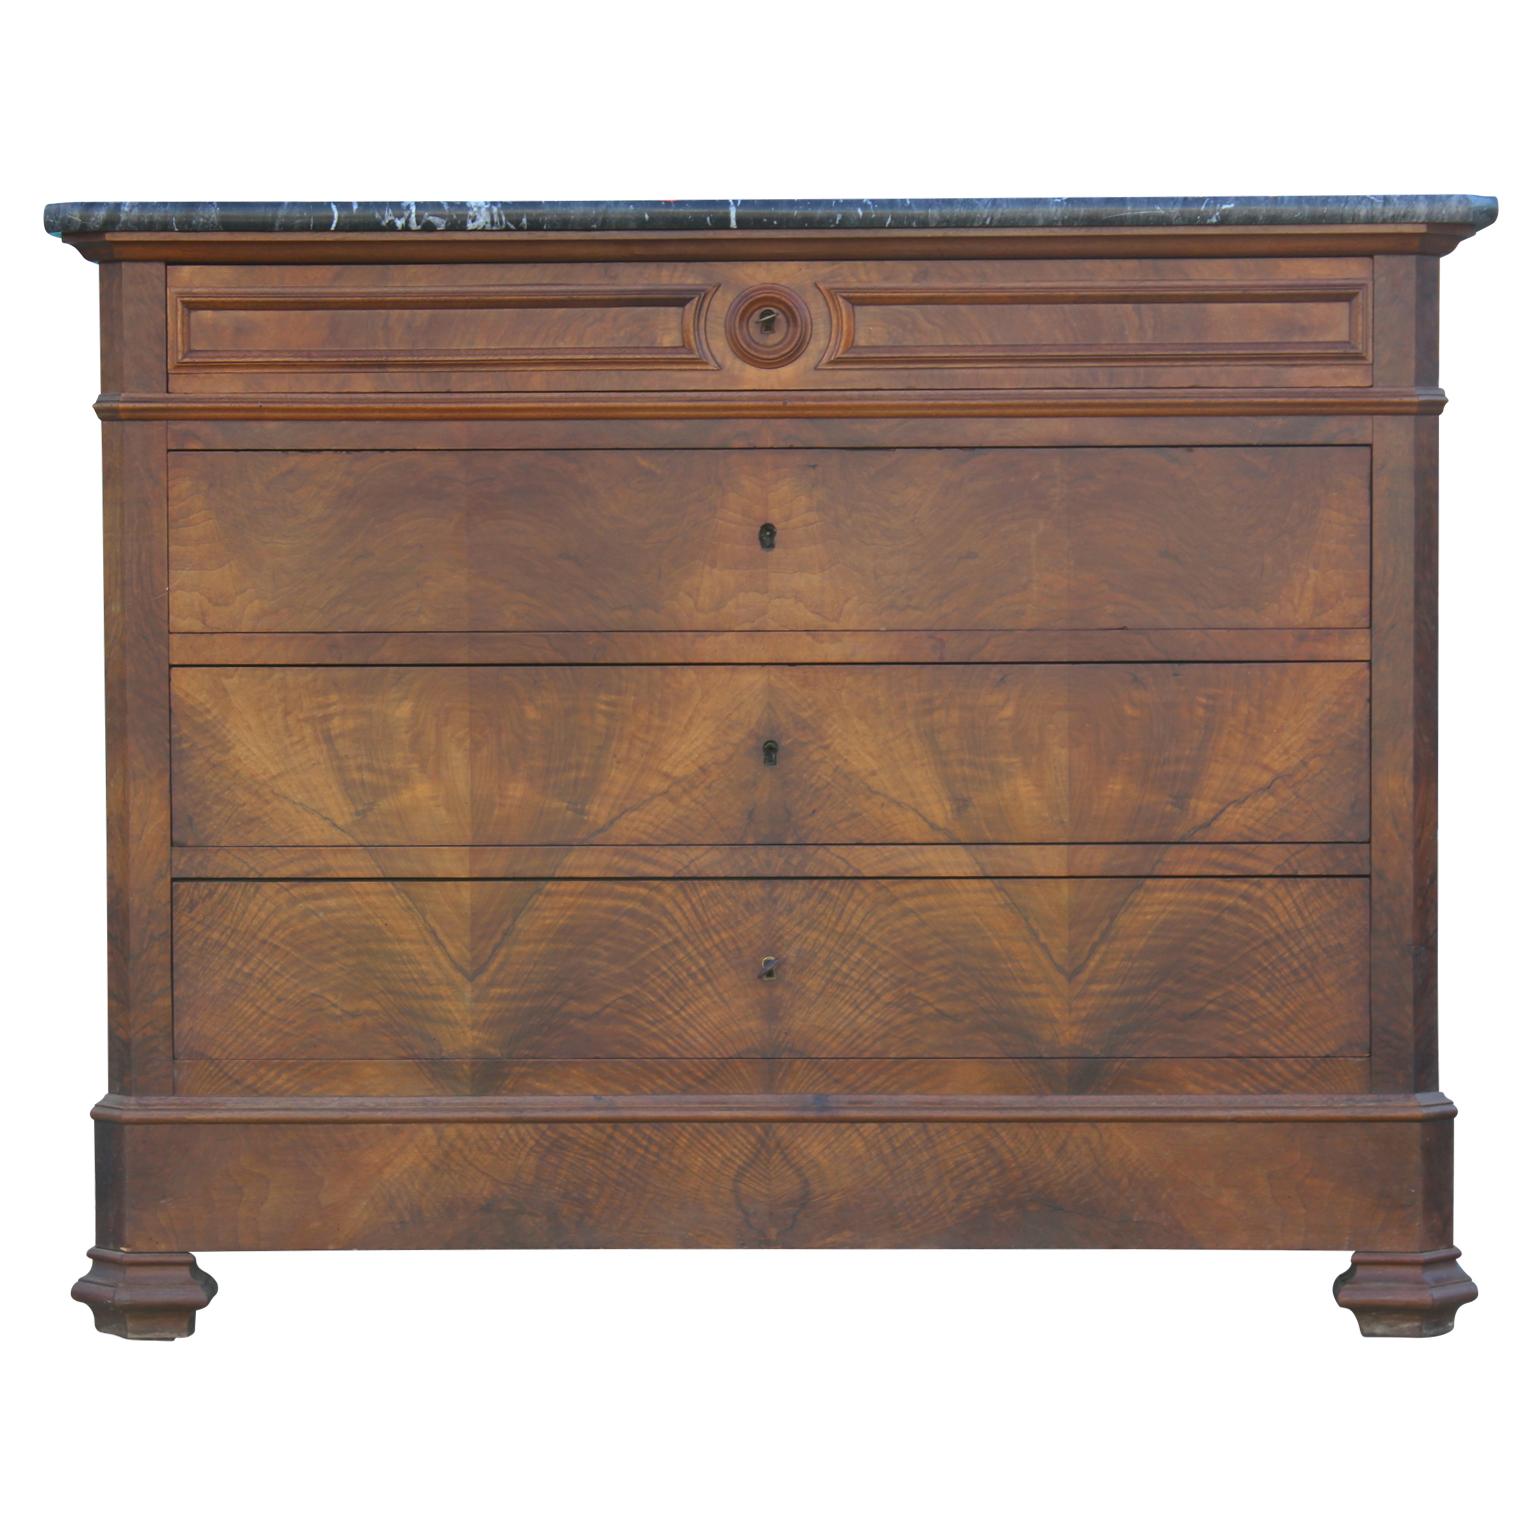 Gorgeous 19th century four-drawer chest of drawers made from a rich walnut with a marble top. George X style.